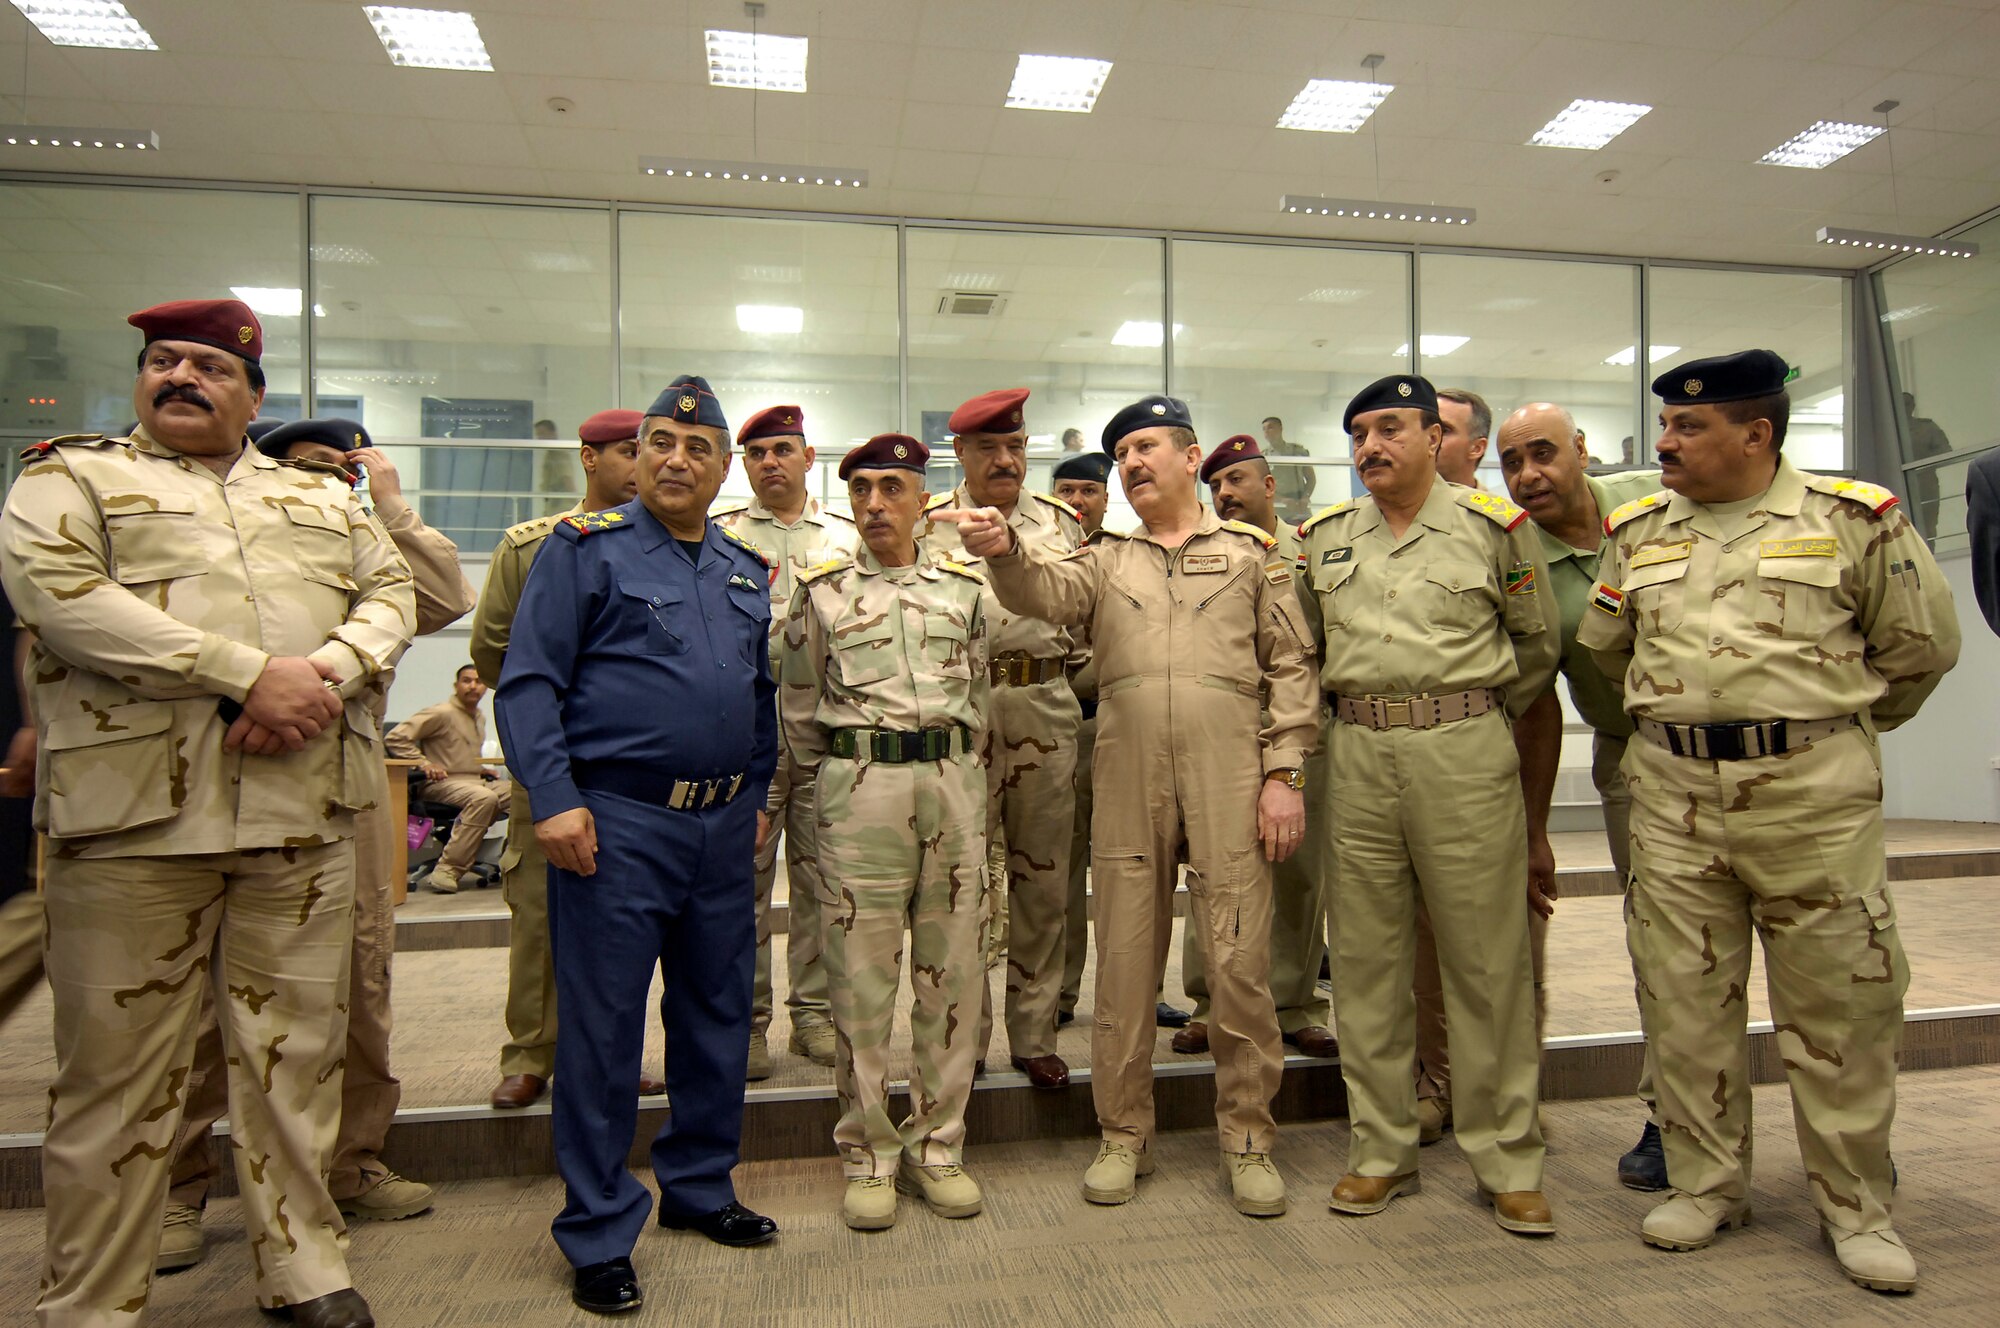 VICTORY BASE COMPLEX, Iraq – Lt. Gen. Anwar Ahmed, Iraqi air force commander, points out the highlights of the new Iraqi air operations center to senior Iraqi air force officials after a ribbon-cutting ceremony April 21. The ribbon-cutting ceremony was just one of the many events held in celebration of the Iraqi air force’s 80th birthday. (U.S. Air Force photo by Tech. Sgt. Randy Redman) 